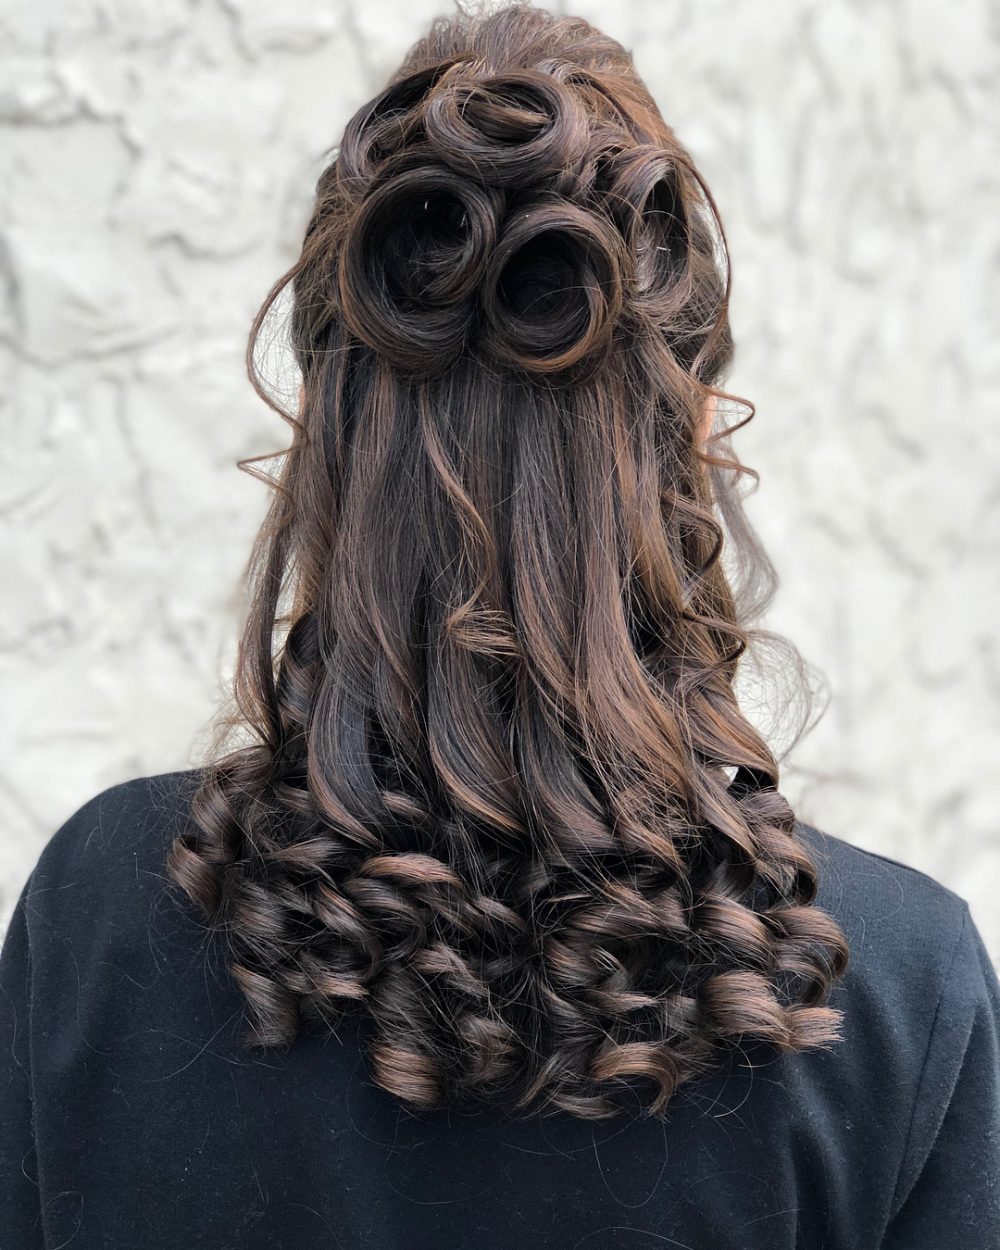 Elegant Curls hairstyle for prom night